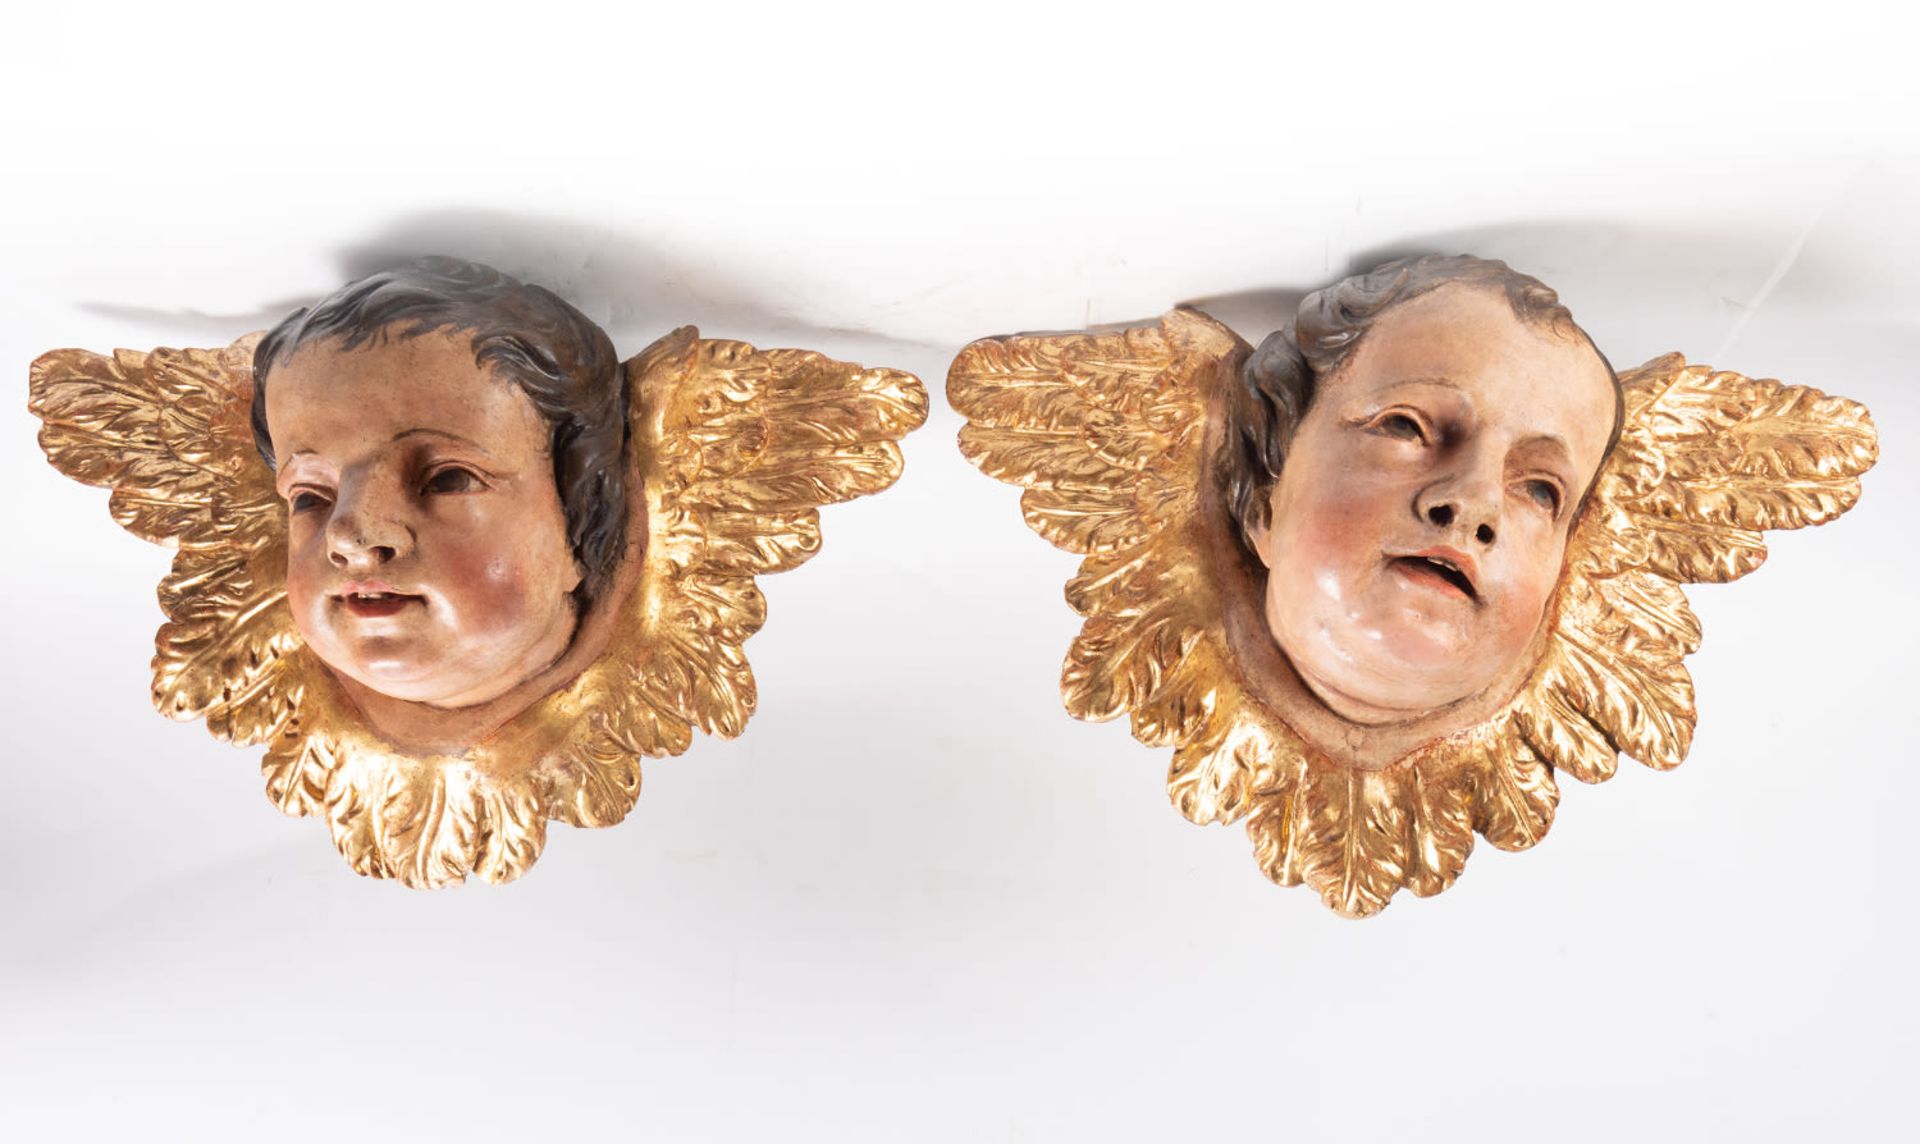 Exceptional Pair of Wall Cherubs Heads, Granada school from the 17th century